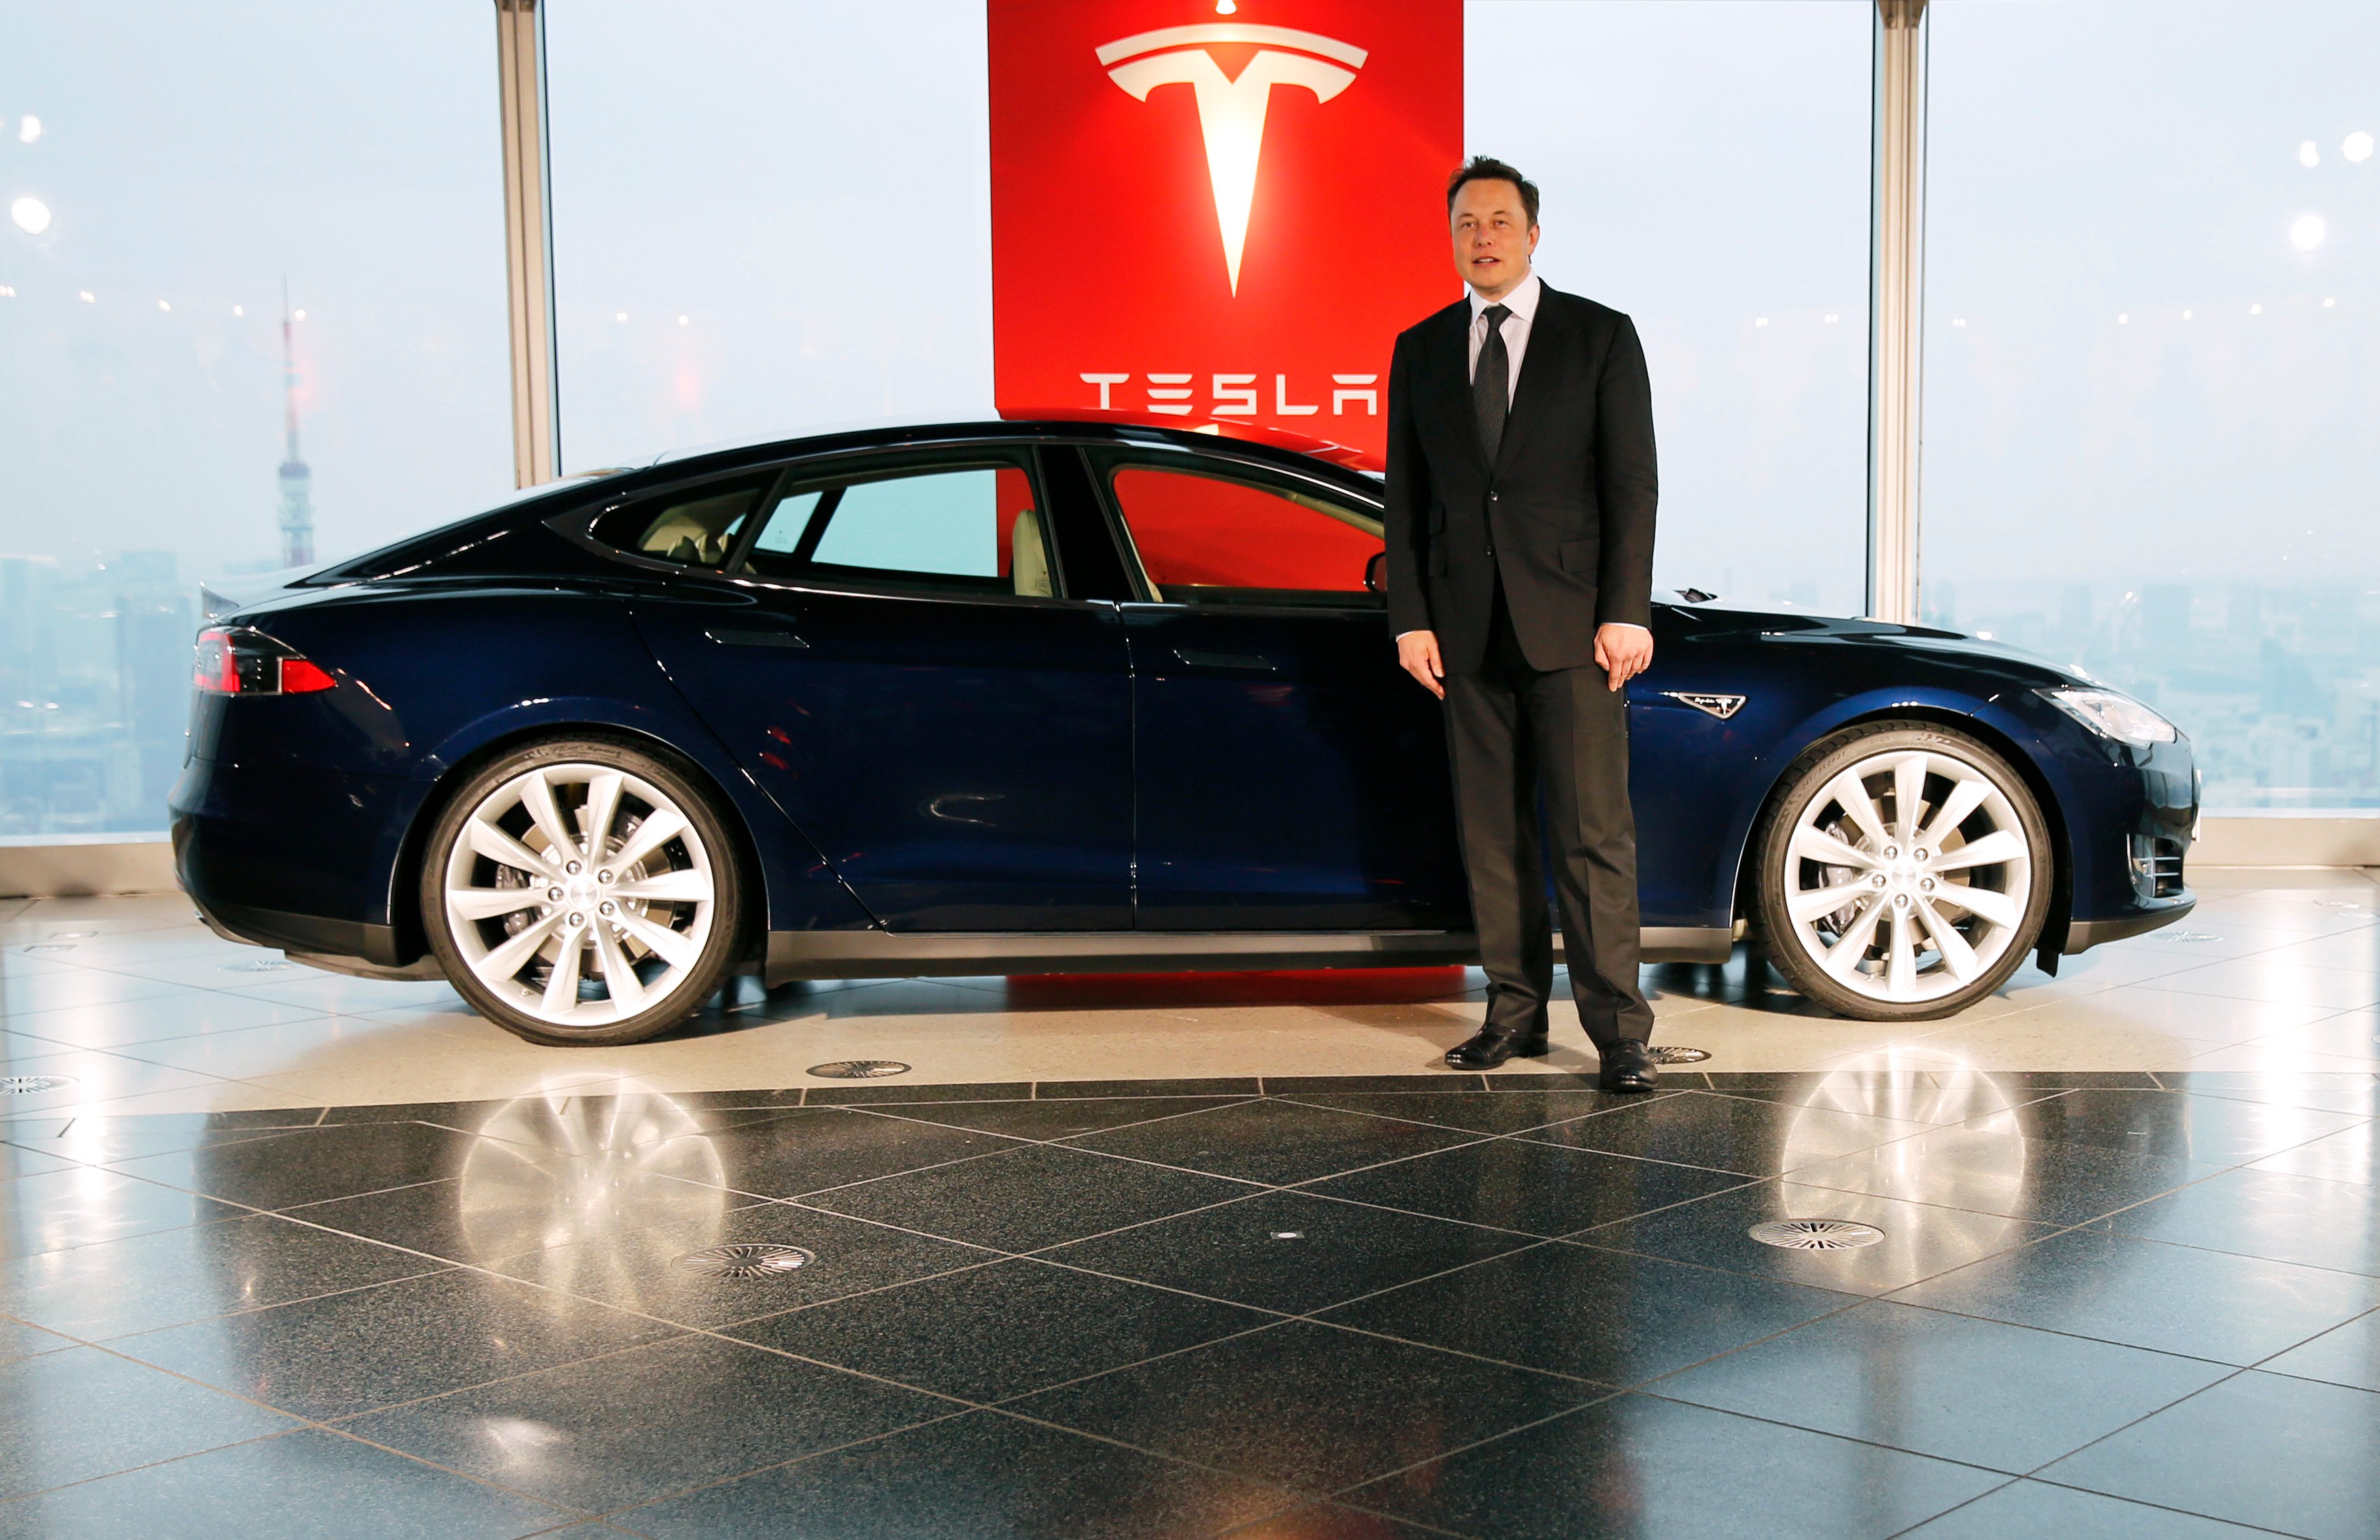 Tesla Motors Inc Chief Executive Musk poses with a Tesla Model S electric car in Tokyo